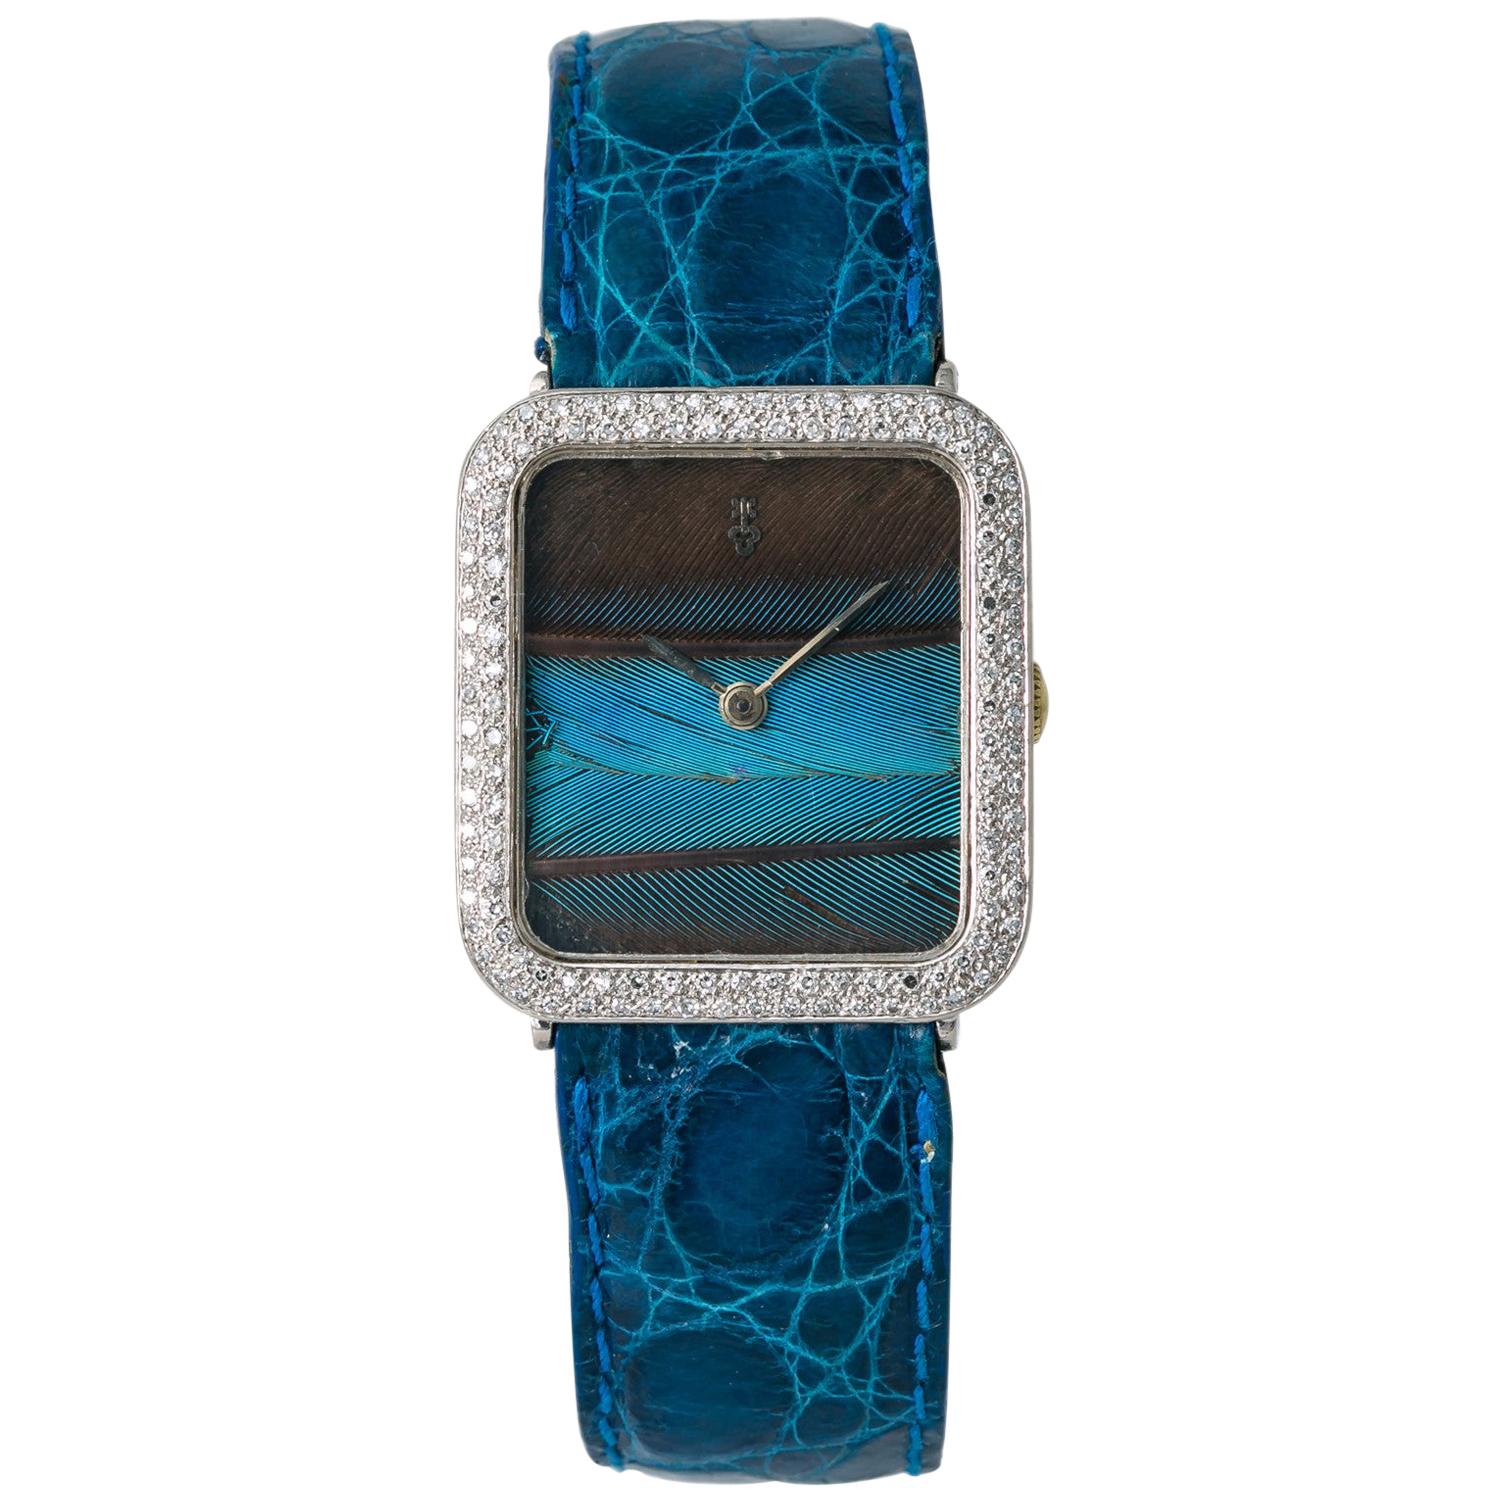 Corum Peacock Feather 27536/7623 Unisex Hand Wind 18k White Gold Diamonds Watch For Sale